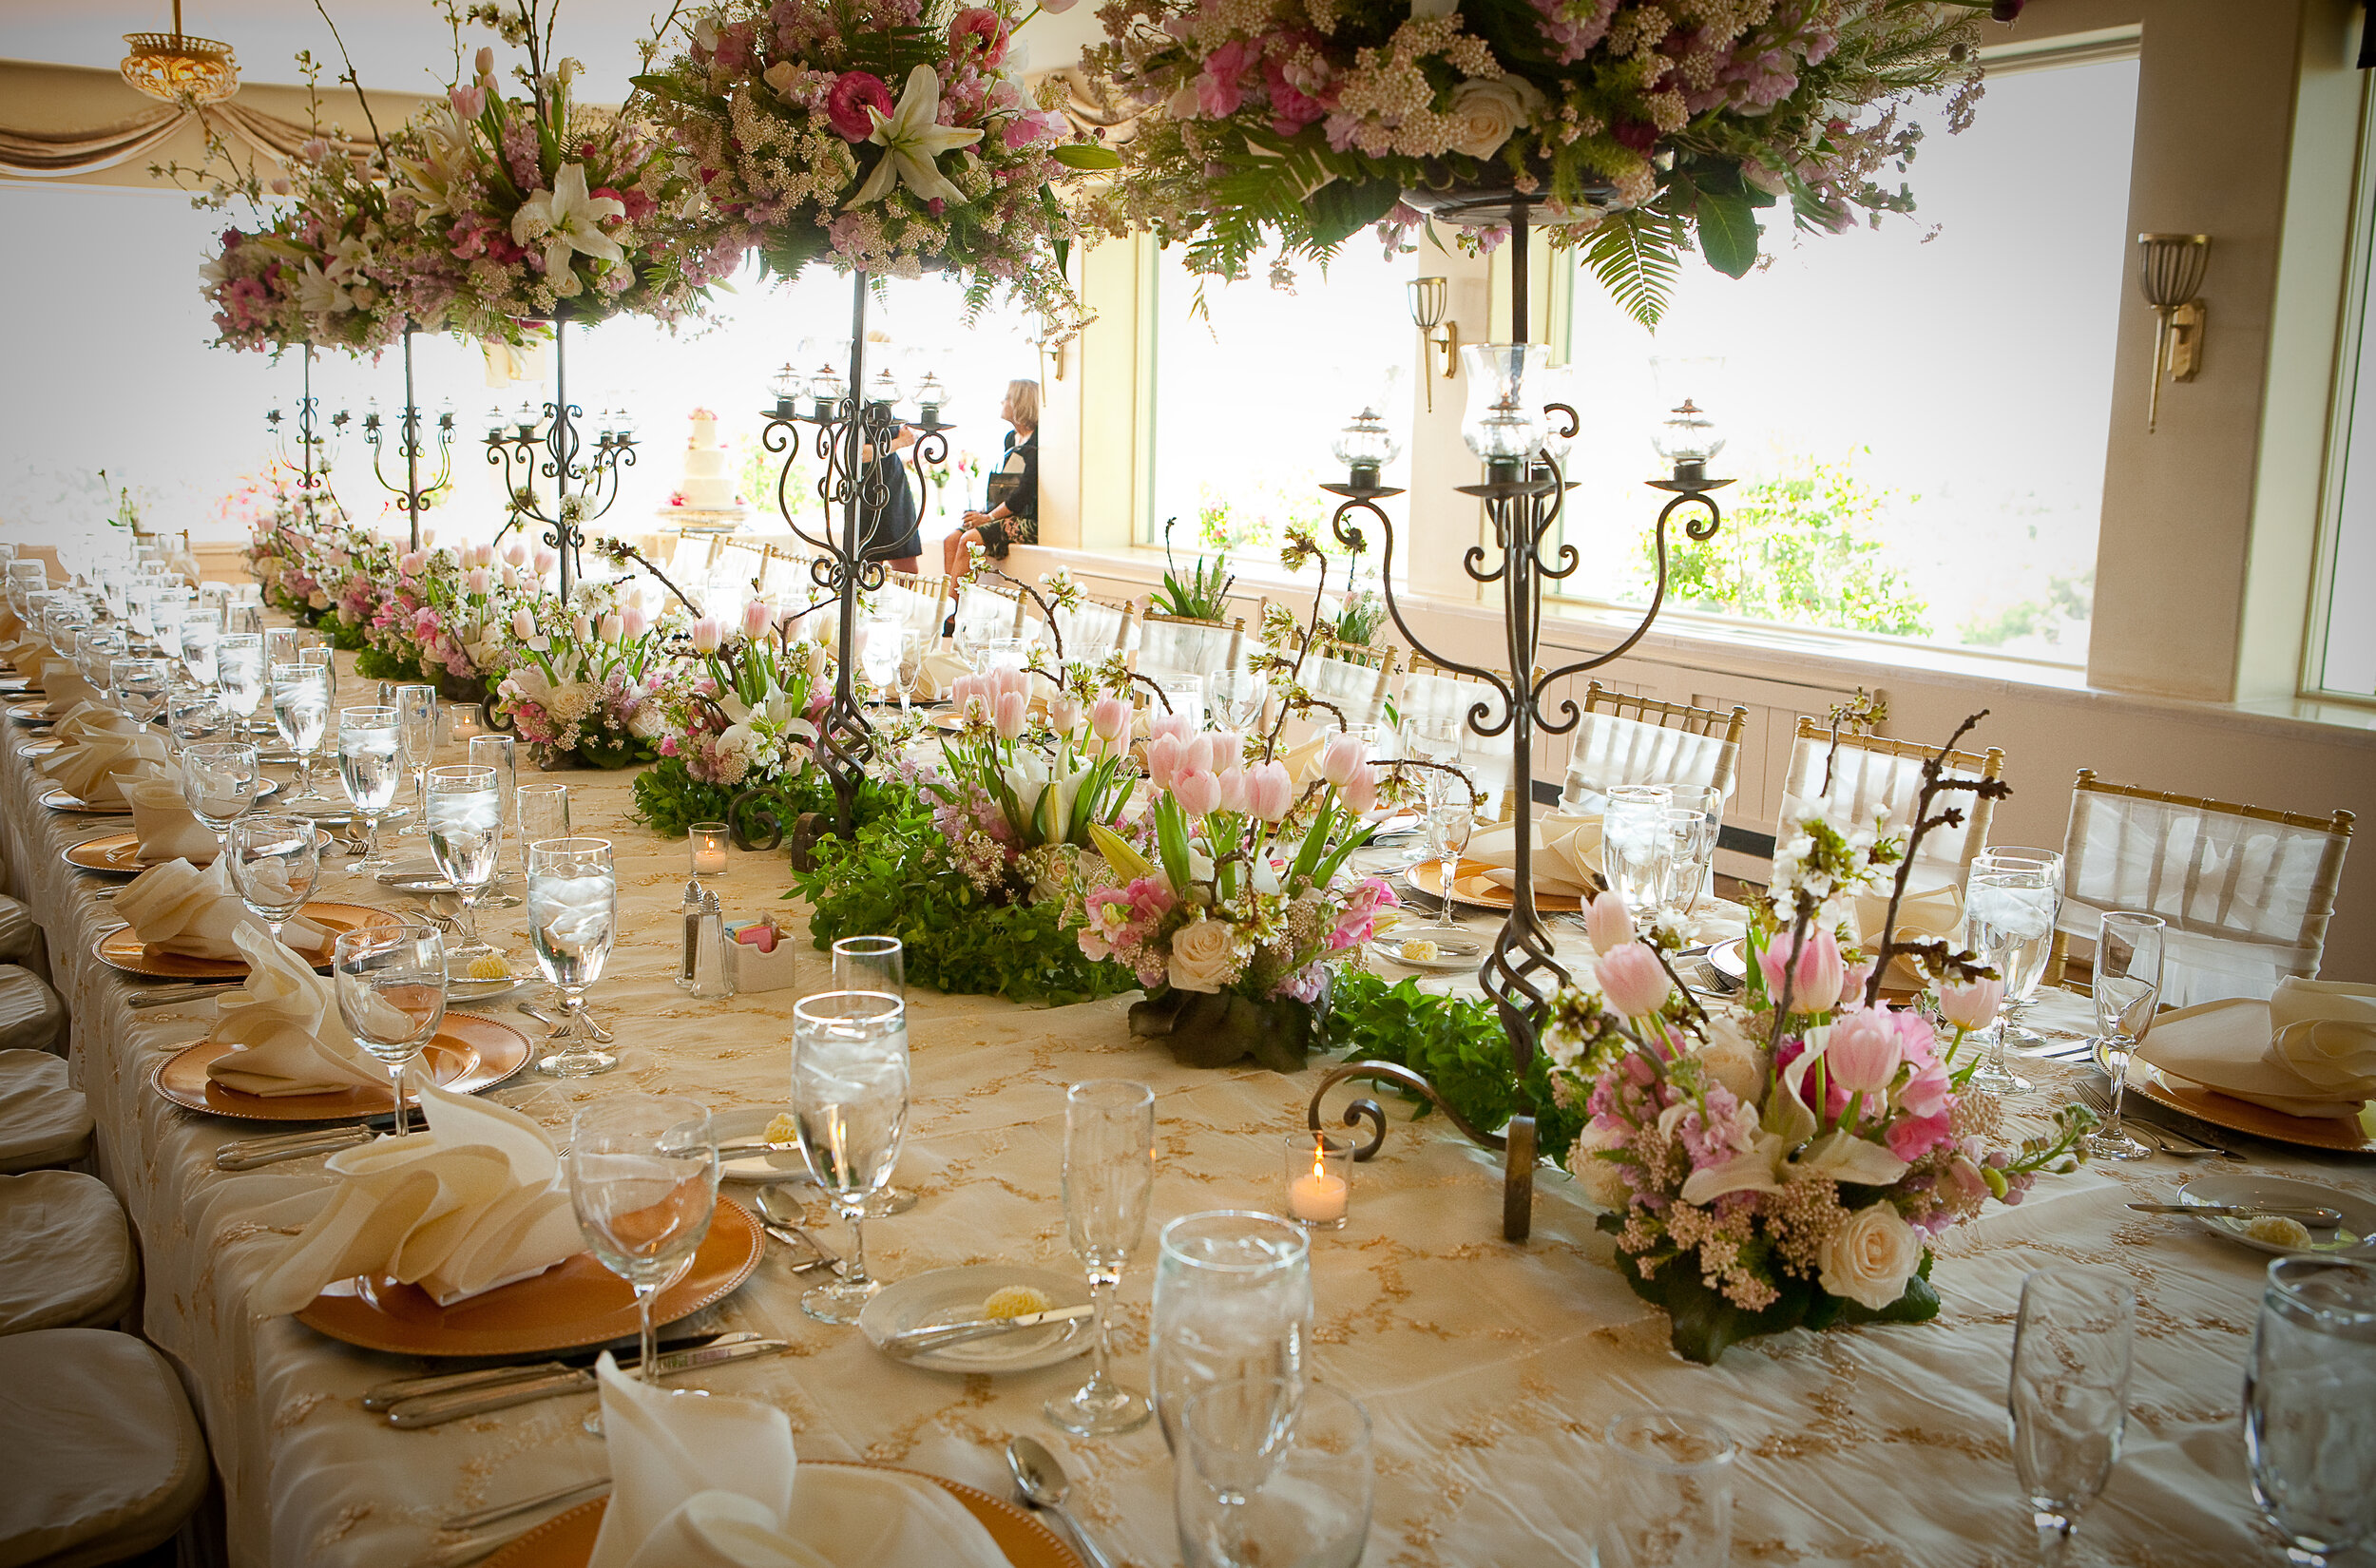 4 spring centerpieces pink and white rose centerpieces tall floral centerpieces long reception table Harrison Hurwitz photography Life Design events.jpg